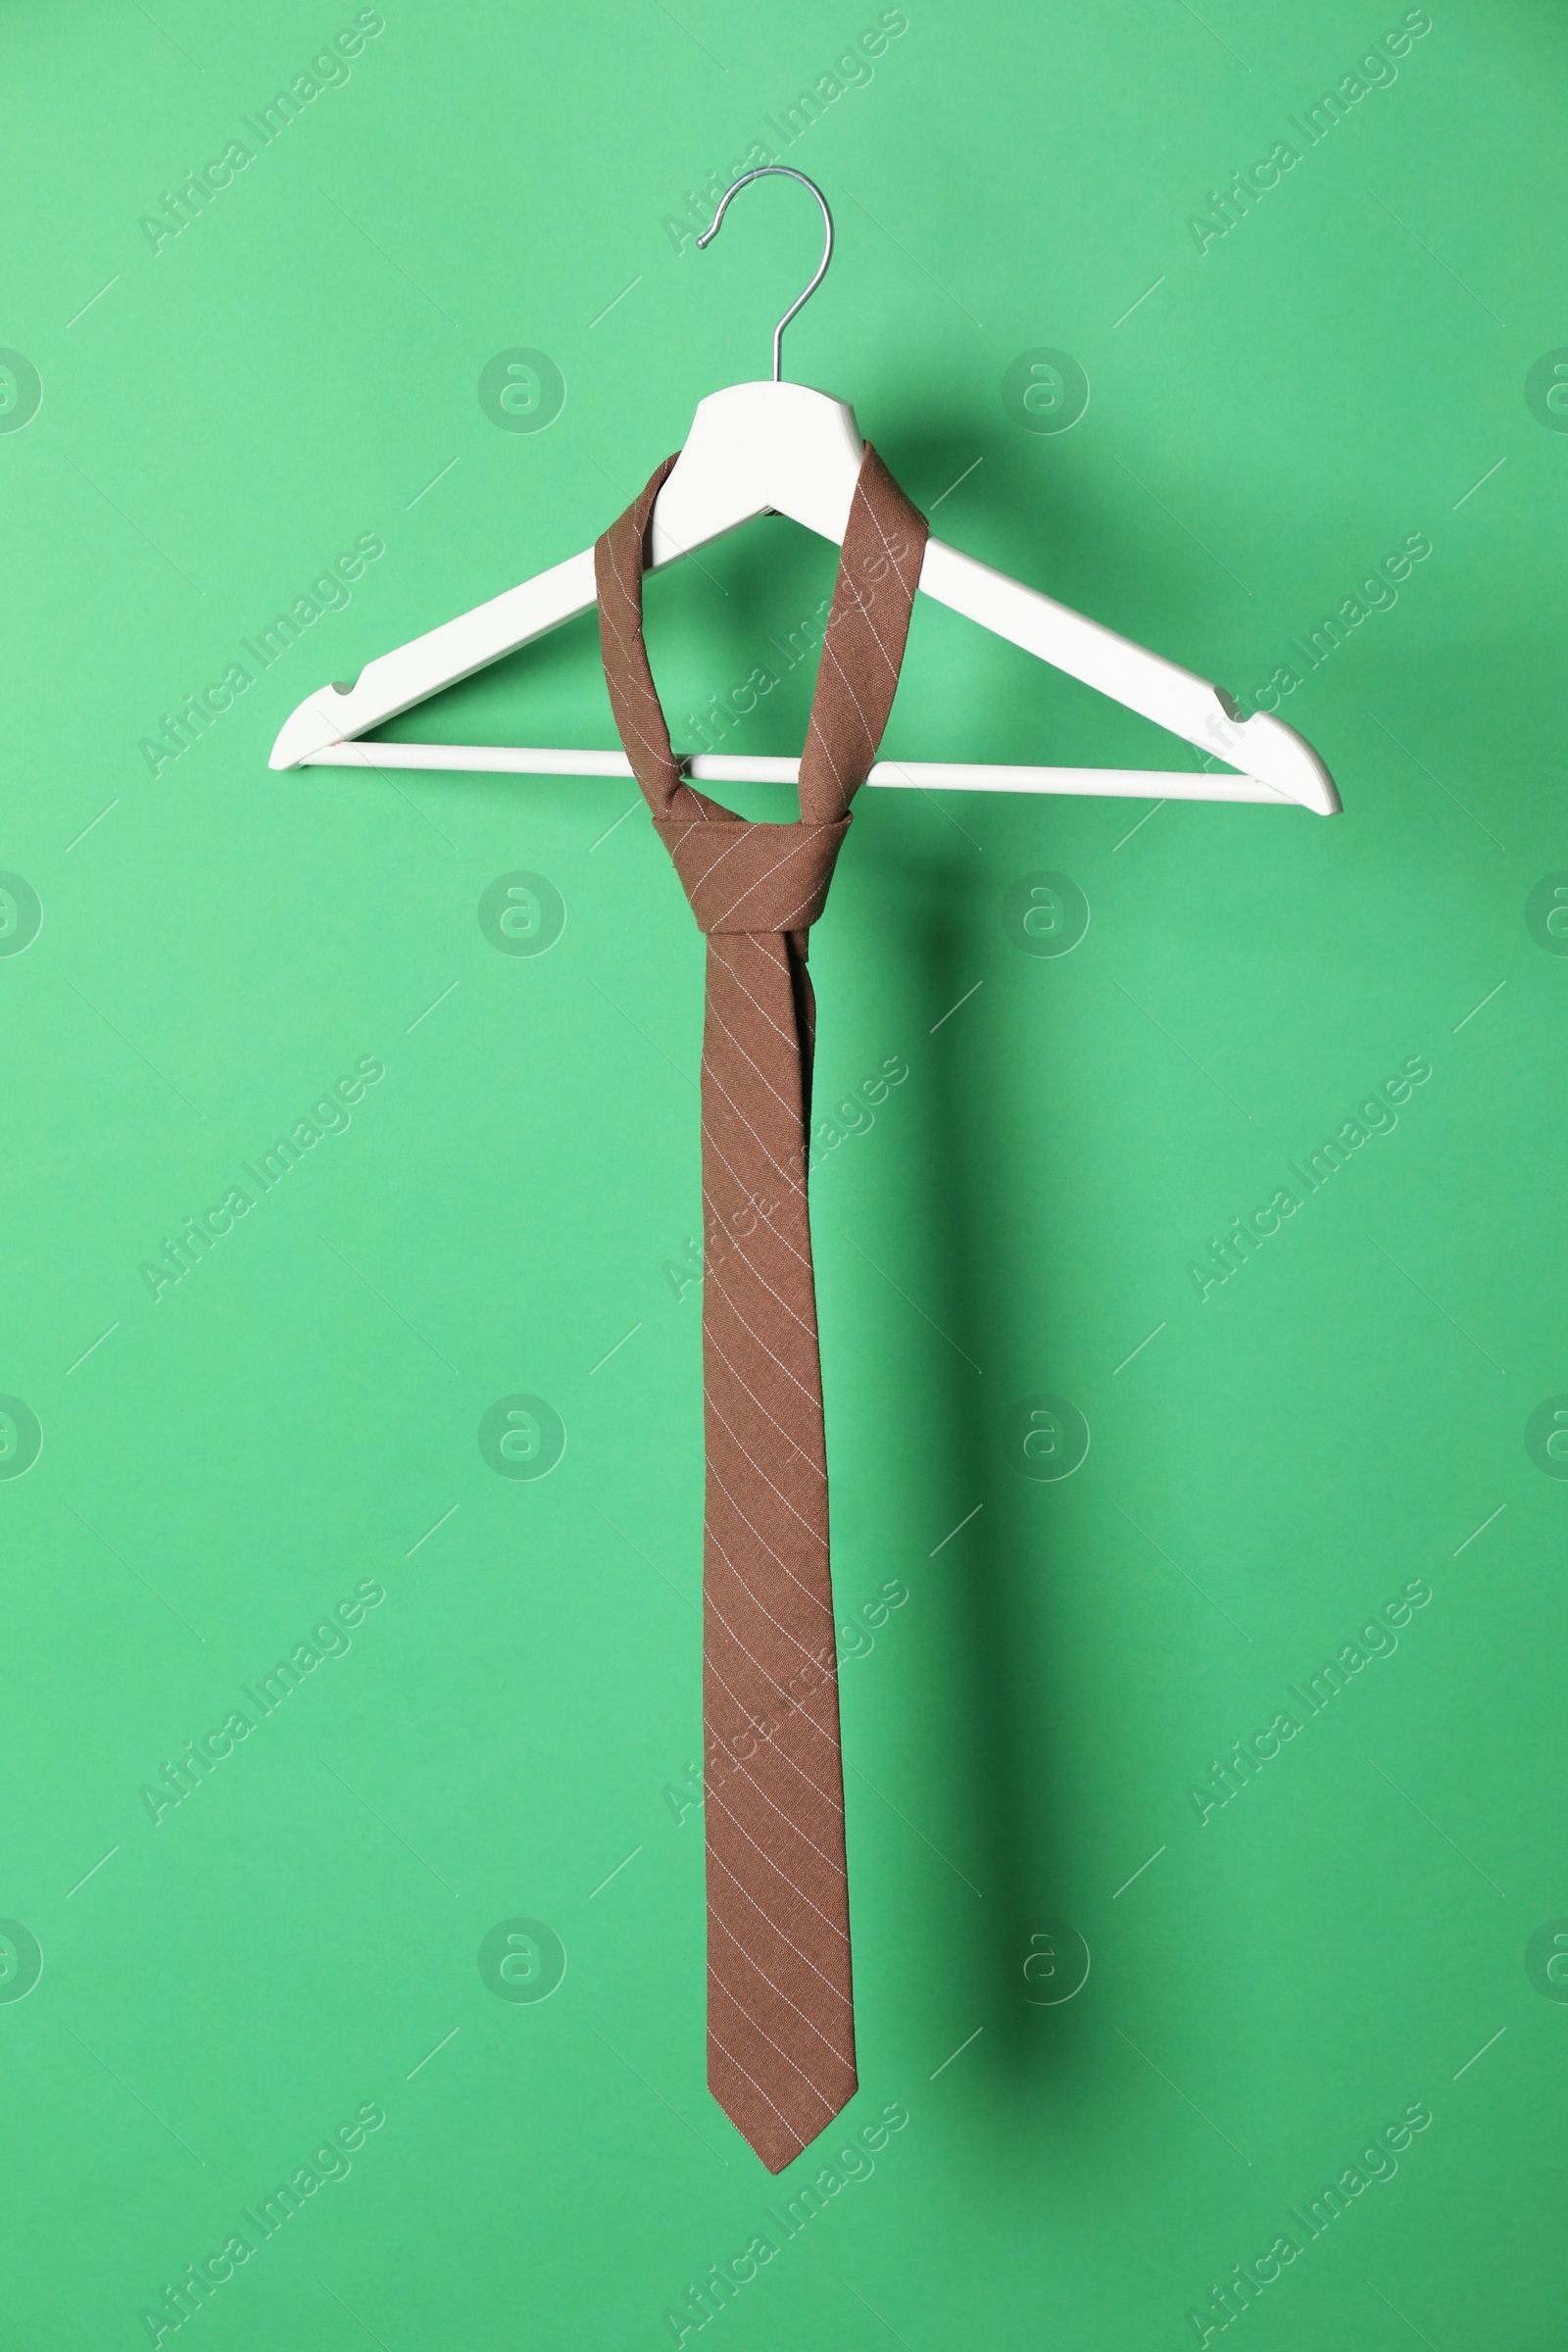 Photo of Hanger with brown striped tie on green background